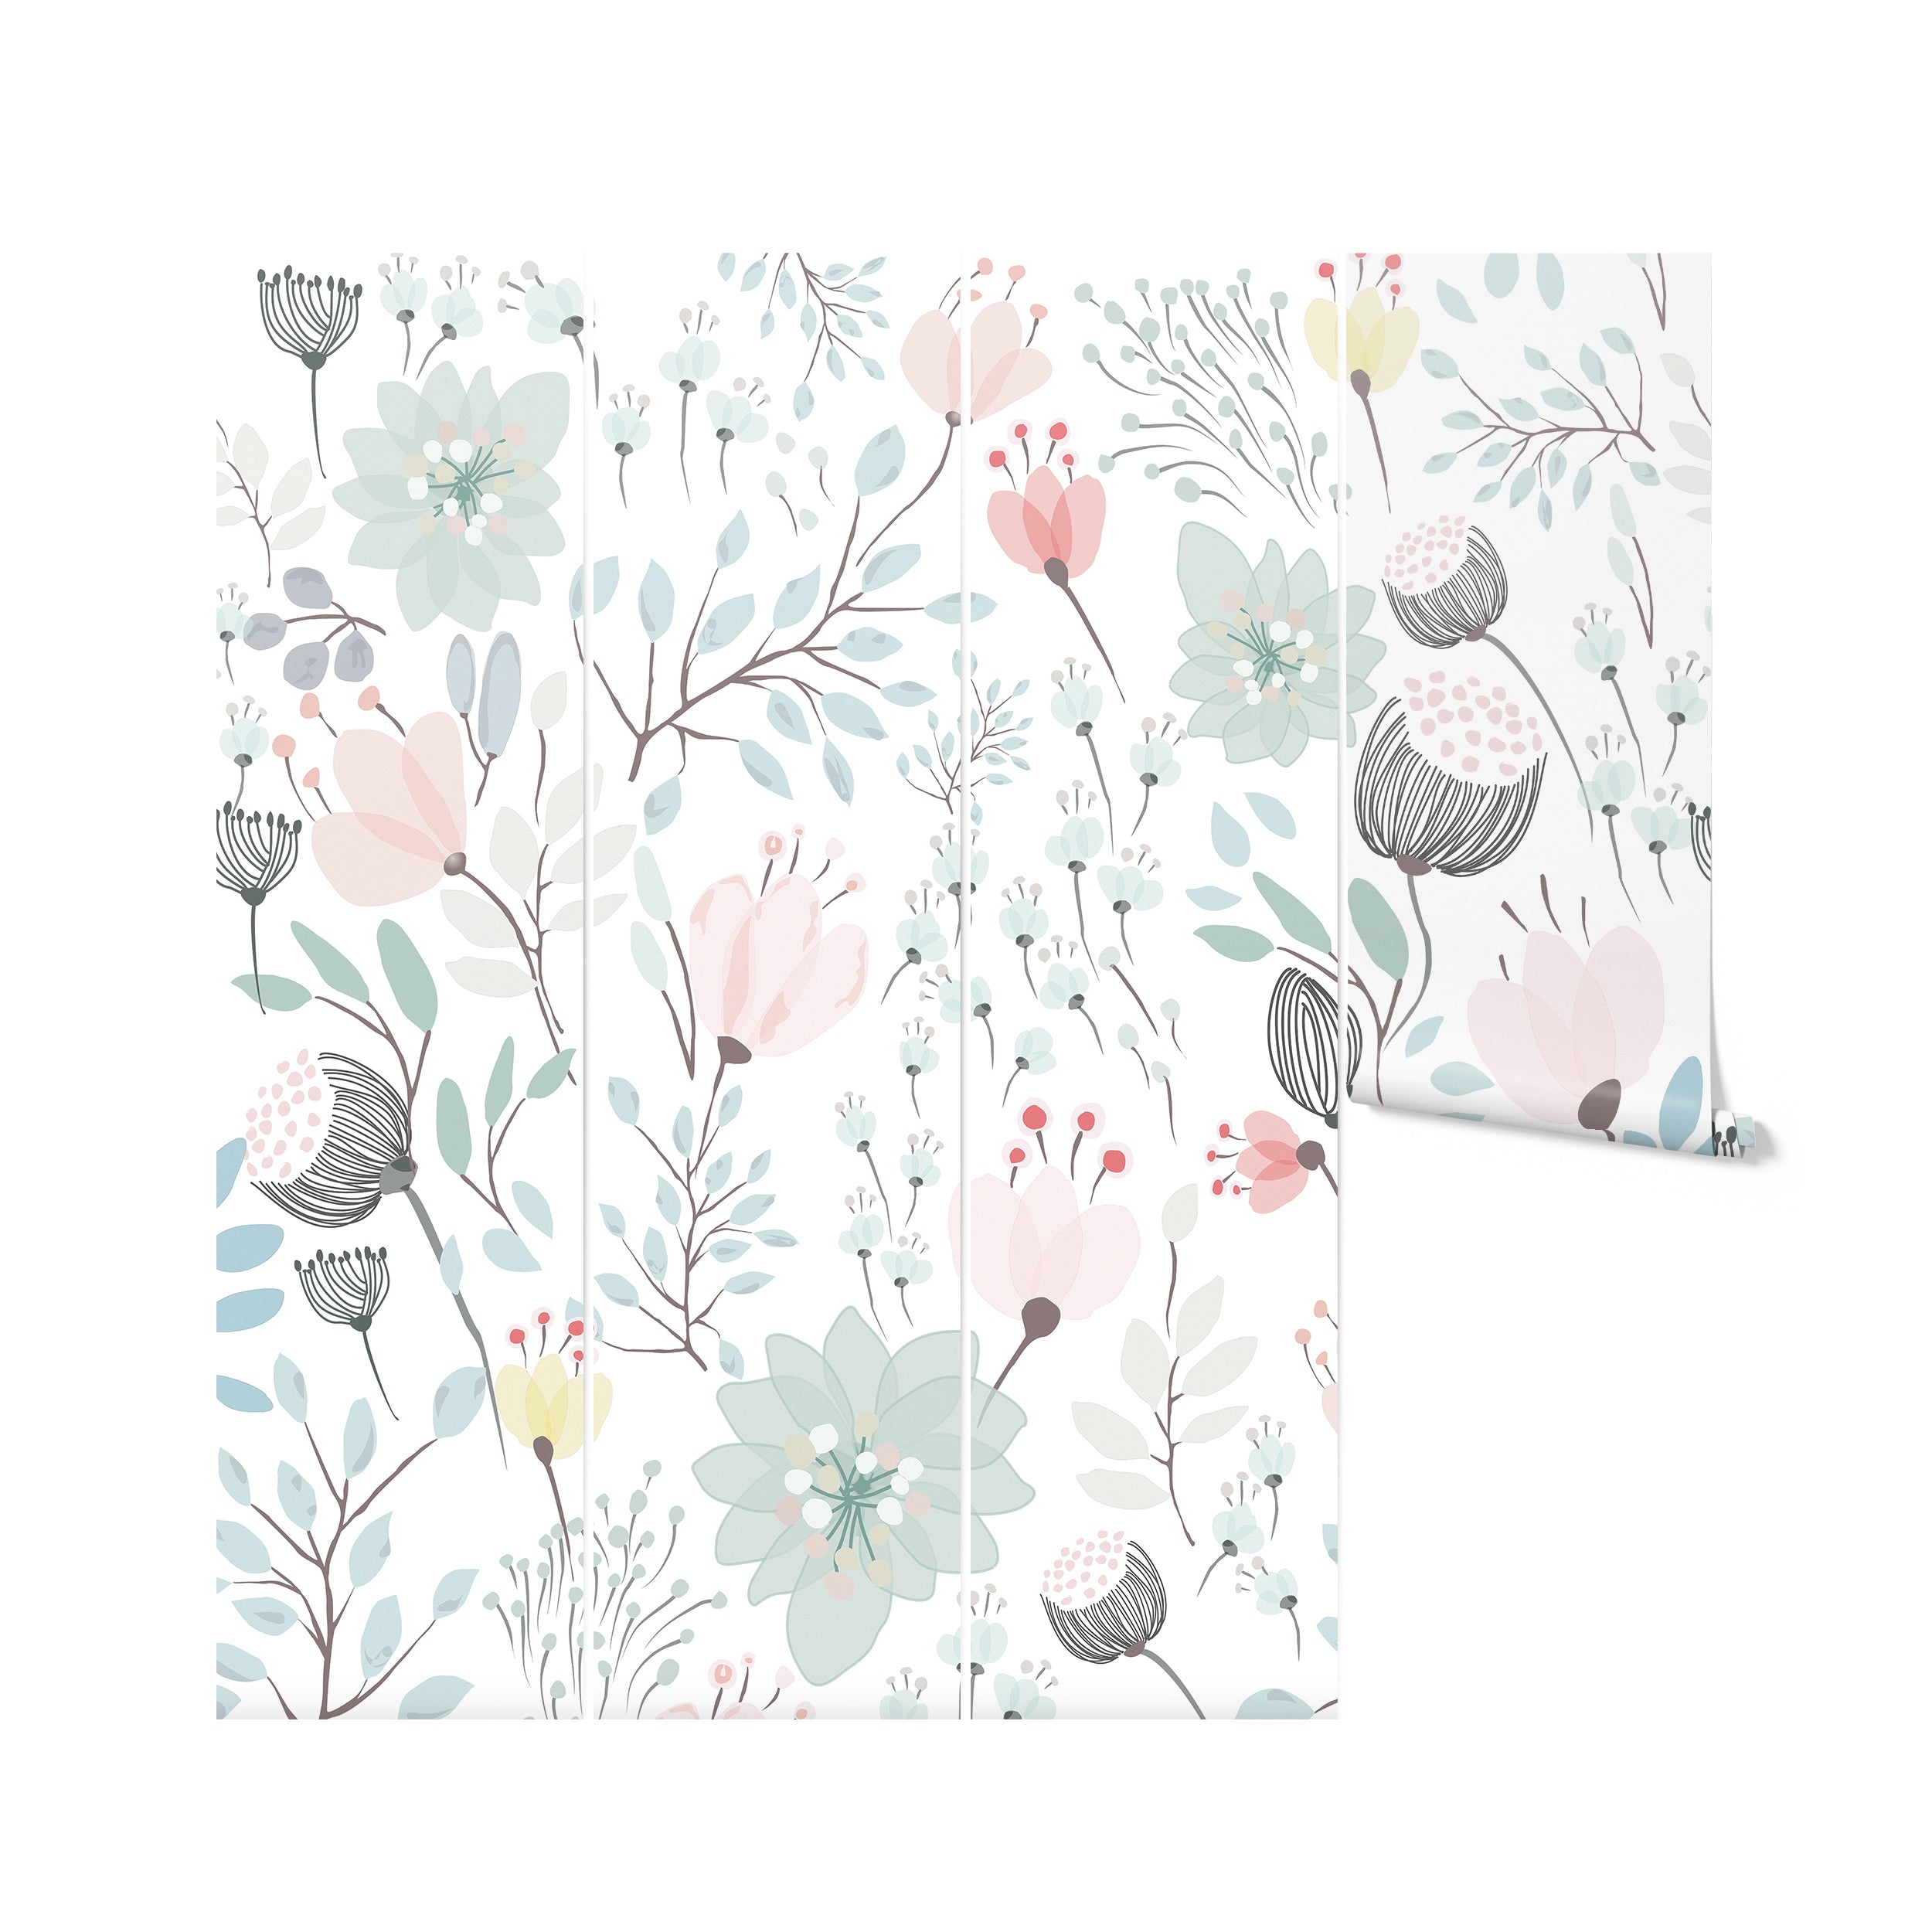 A close-up of a stylish pastel floral wallpaper with a fresh and modern design, showcasing a variety of abstract flowers and leaves in shades of pink, blue, and green, ideal for a light and airy interior.